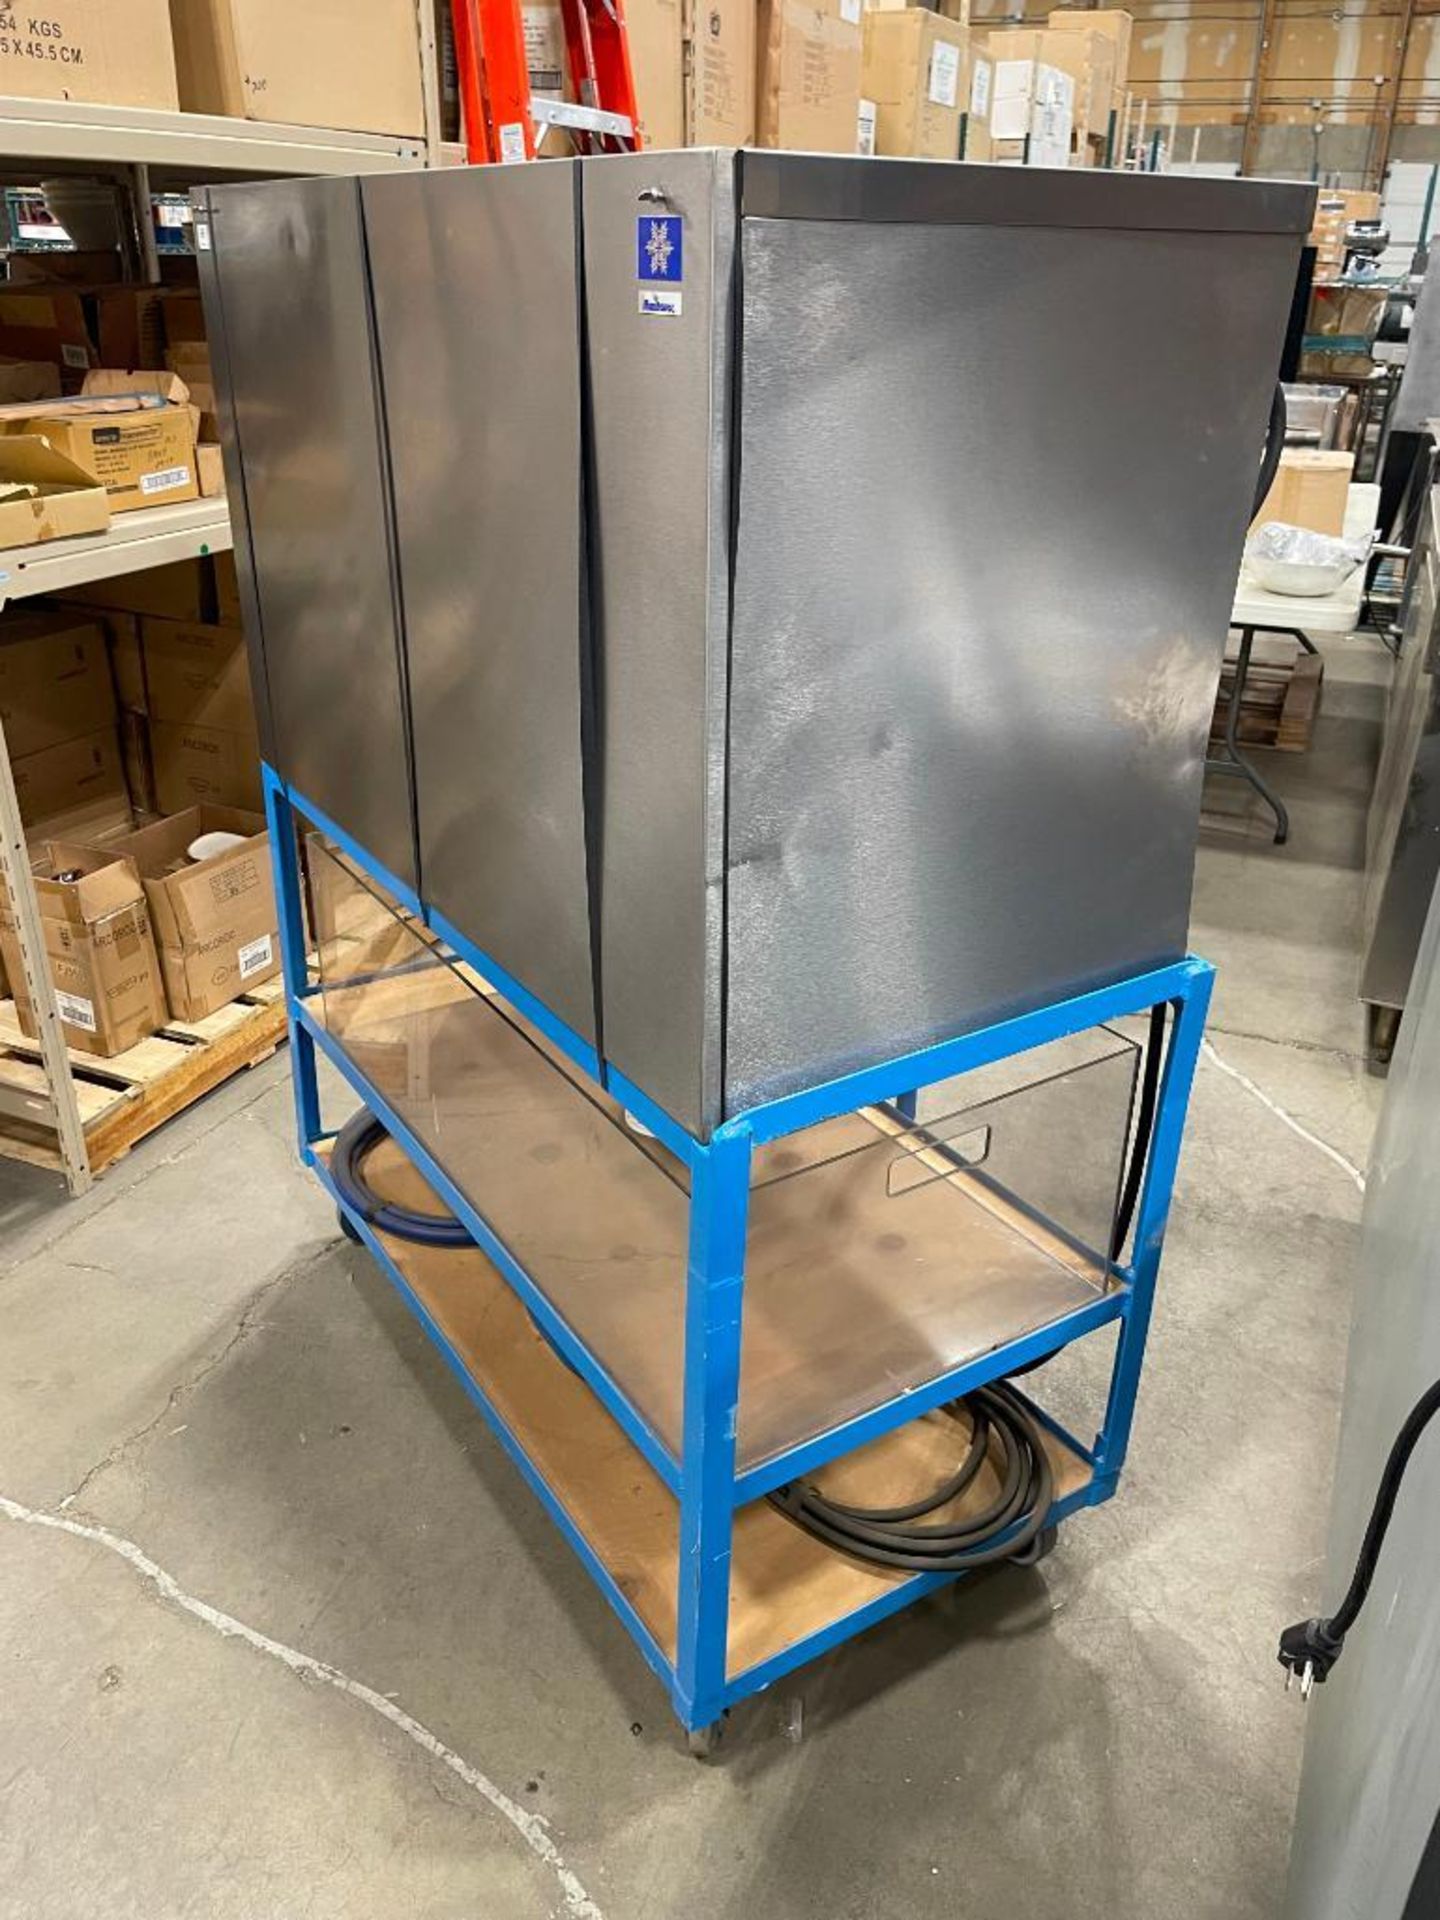 MANITOWOC SY1805W WATER COOLED 1710 LBS/DAY ICE MACHINE WITH STEEL MOBILE CART *ICE STORAGE BIN NOT - Image 9 of 10